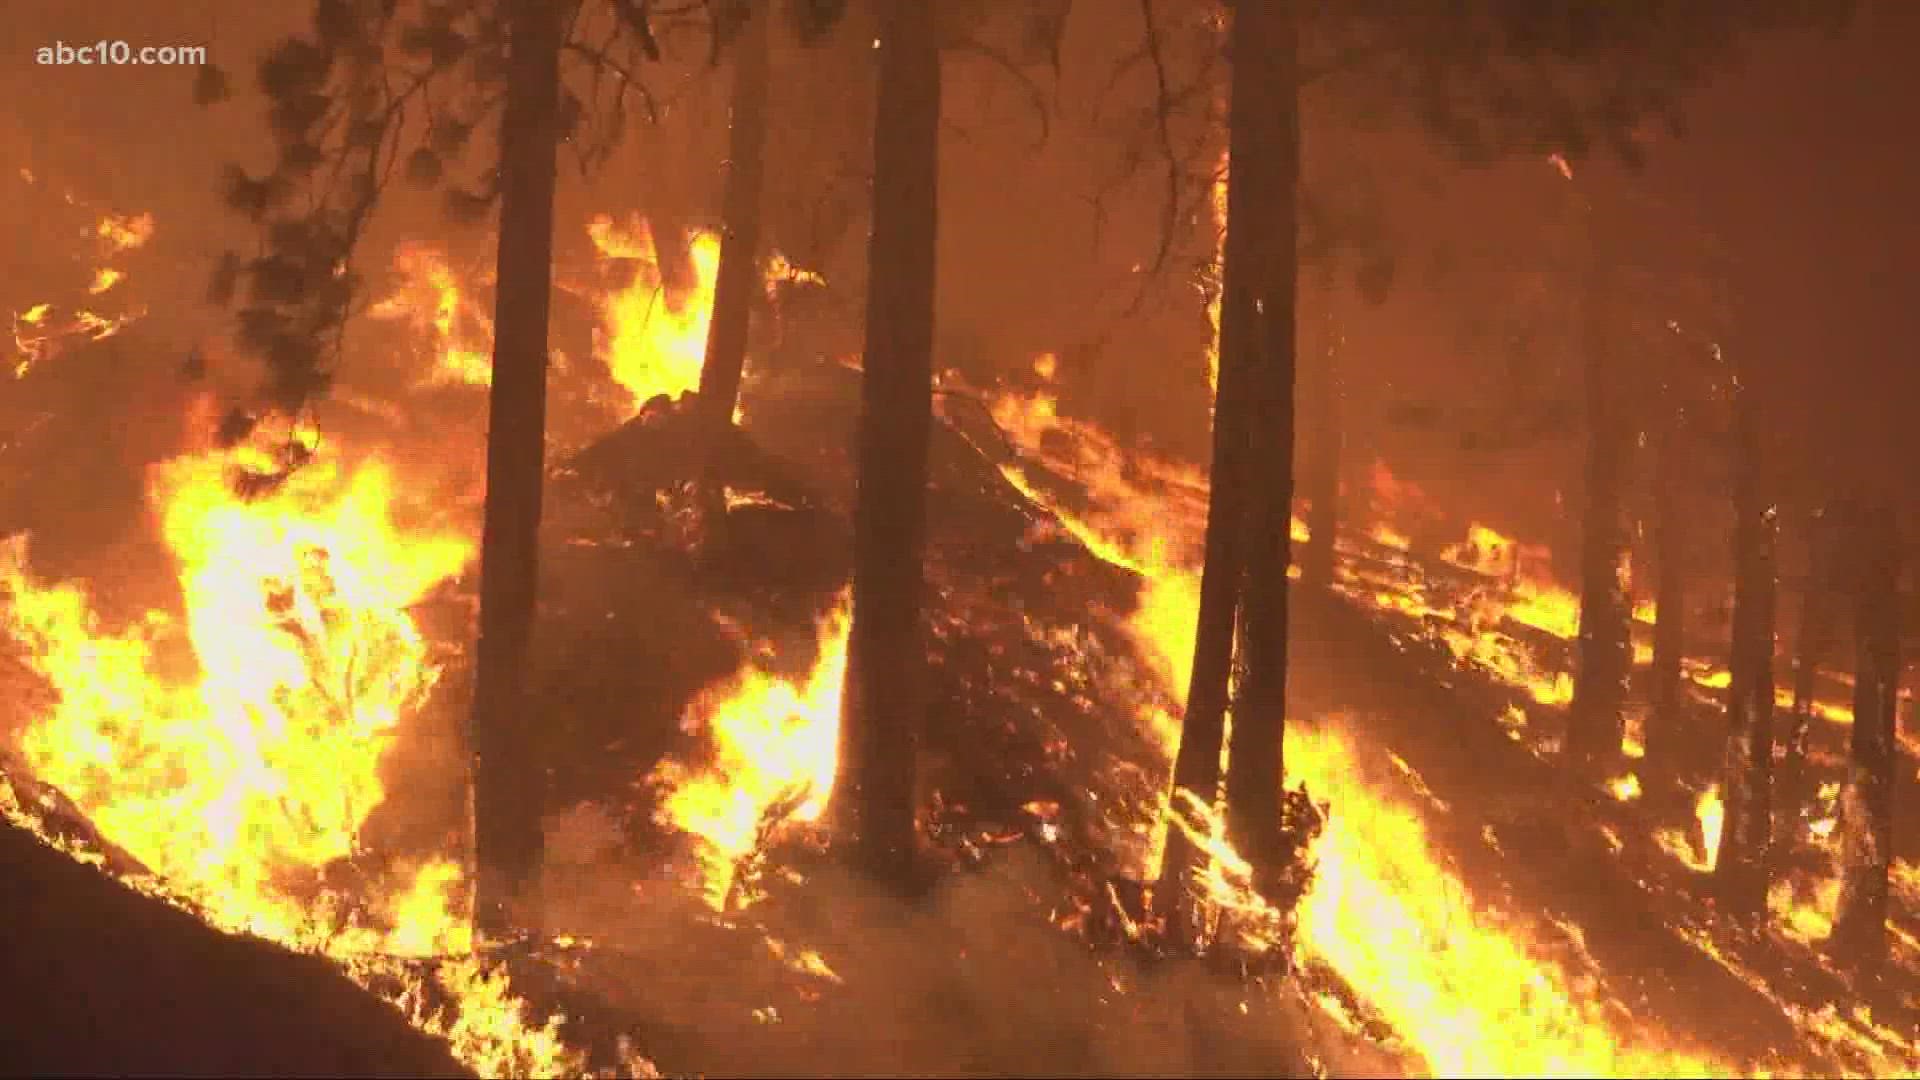 Two evacuation centers filled up Tuesday night as residents of El Dorado County fled the Caldor Fire.